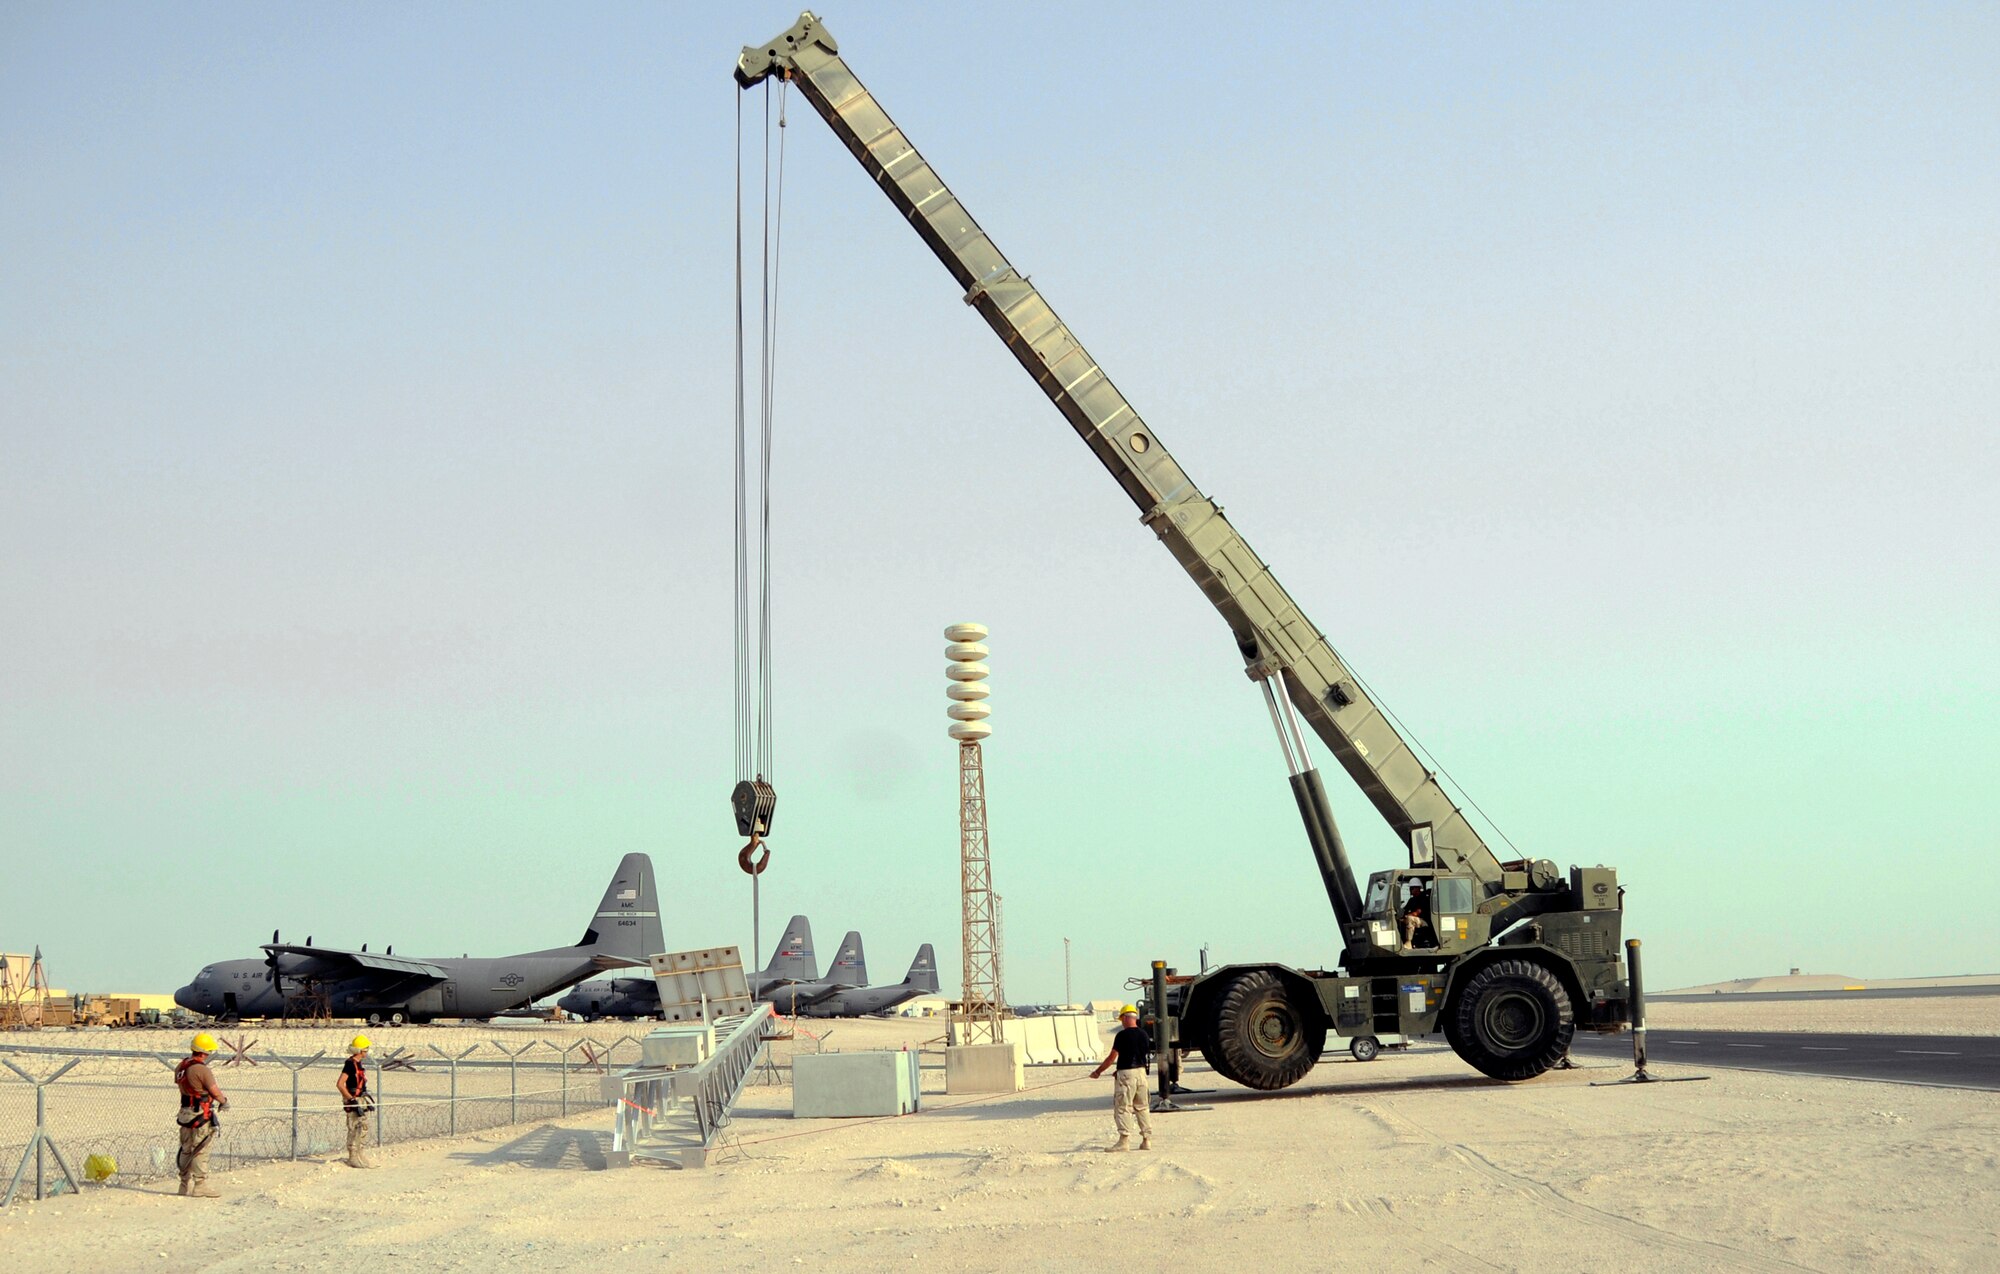 Senior Airman Kyle Troxell, 379th Expeditionary Civil Engineer Squadron, operates a 60-ton crane efficiently lifting a new Giant Voice tower onto its cement block mount Aug. 26, 2008, at an undisclosed location in Southwest Asia. Senior Airman Clinton Rowland, 379th Expeditionary Communications Squadron, holds a rope attached to the top left leg of the tower, while Staff Sgt. Clyde Hunt, 379 ECS, holds a line attached to the tower’s bottom right leg.  The ropes are used as guides to keep the tower in line once in the air.  Sergeant Hunt, Airman Rowland and Airman Troxell are members of a team exchanging aging towers with a sturdier replacement that should last nearly twice as long.  The Giant Voice system is used to communicate important information to all the base population instantaneously. Sergeant Hunt, a native of Shreveport La., is deployed from the Louisiana Air National Guard. Airman Rowland hails from Athens, Ga., and is deployed from Royal Air Force Lakenheath, United Kingdom. Airman Troxell is deployed from Scott Air Force Base, Ill.  All are supporting Operations Iraqi and Enduring Freedom and Joint Task Force-Horn of Africa.  (U.S. Air Force photo by Tech. Sgt. Michael Boquette/Released)